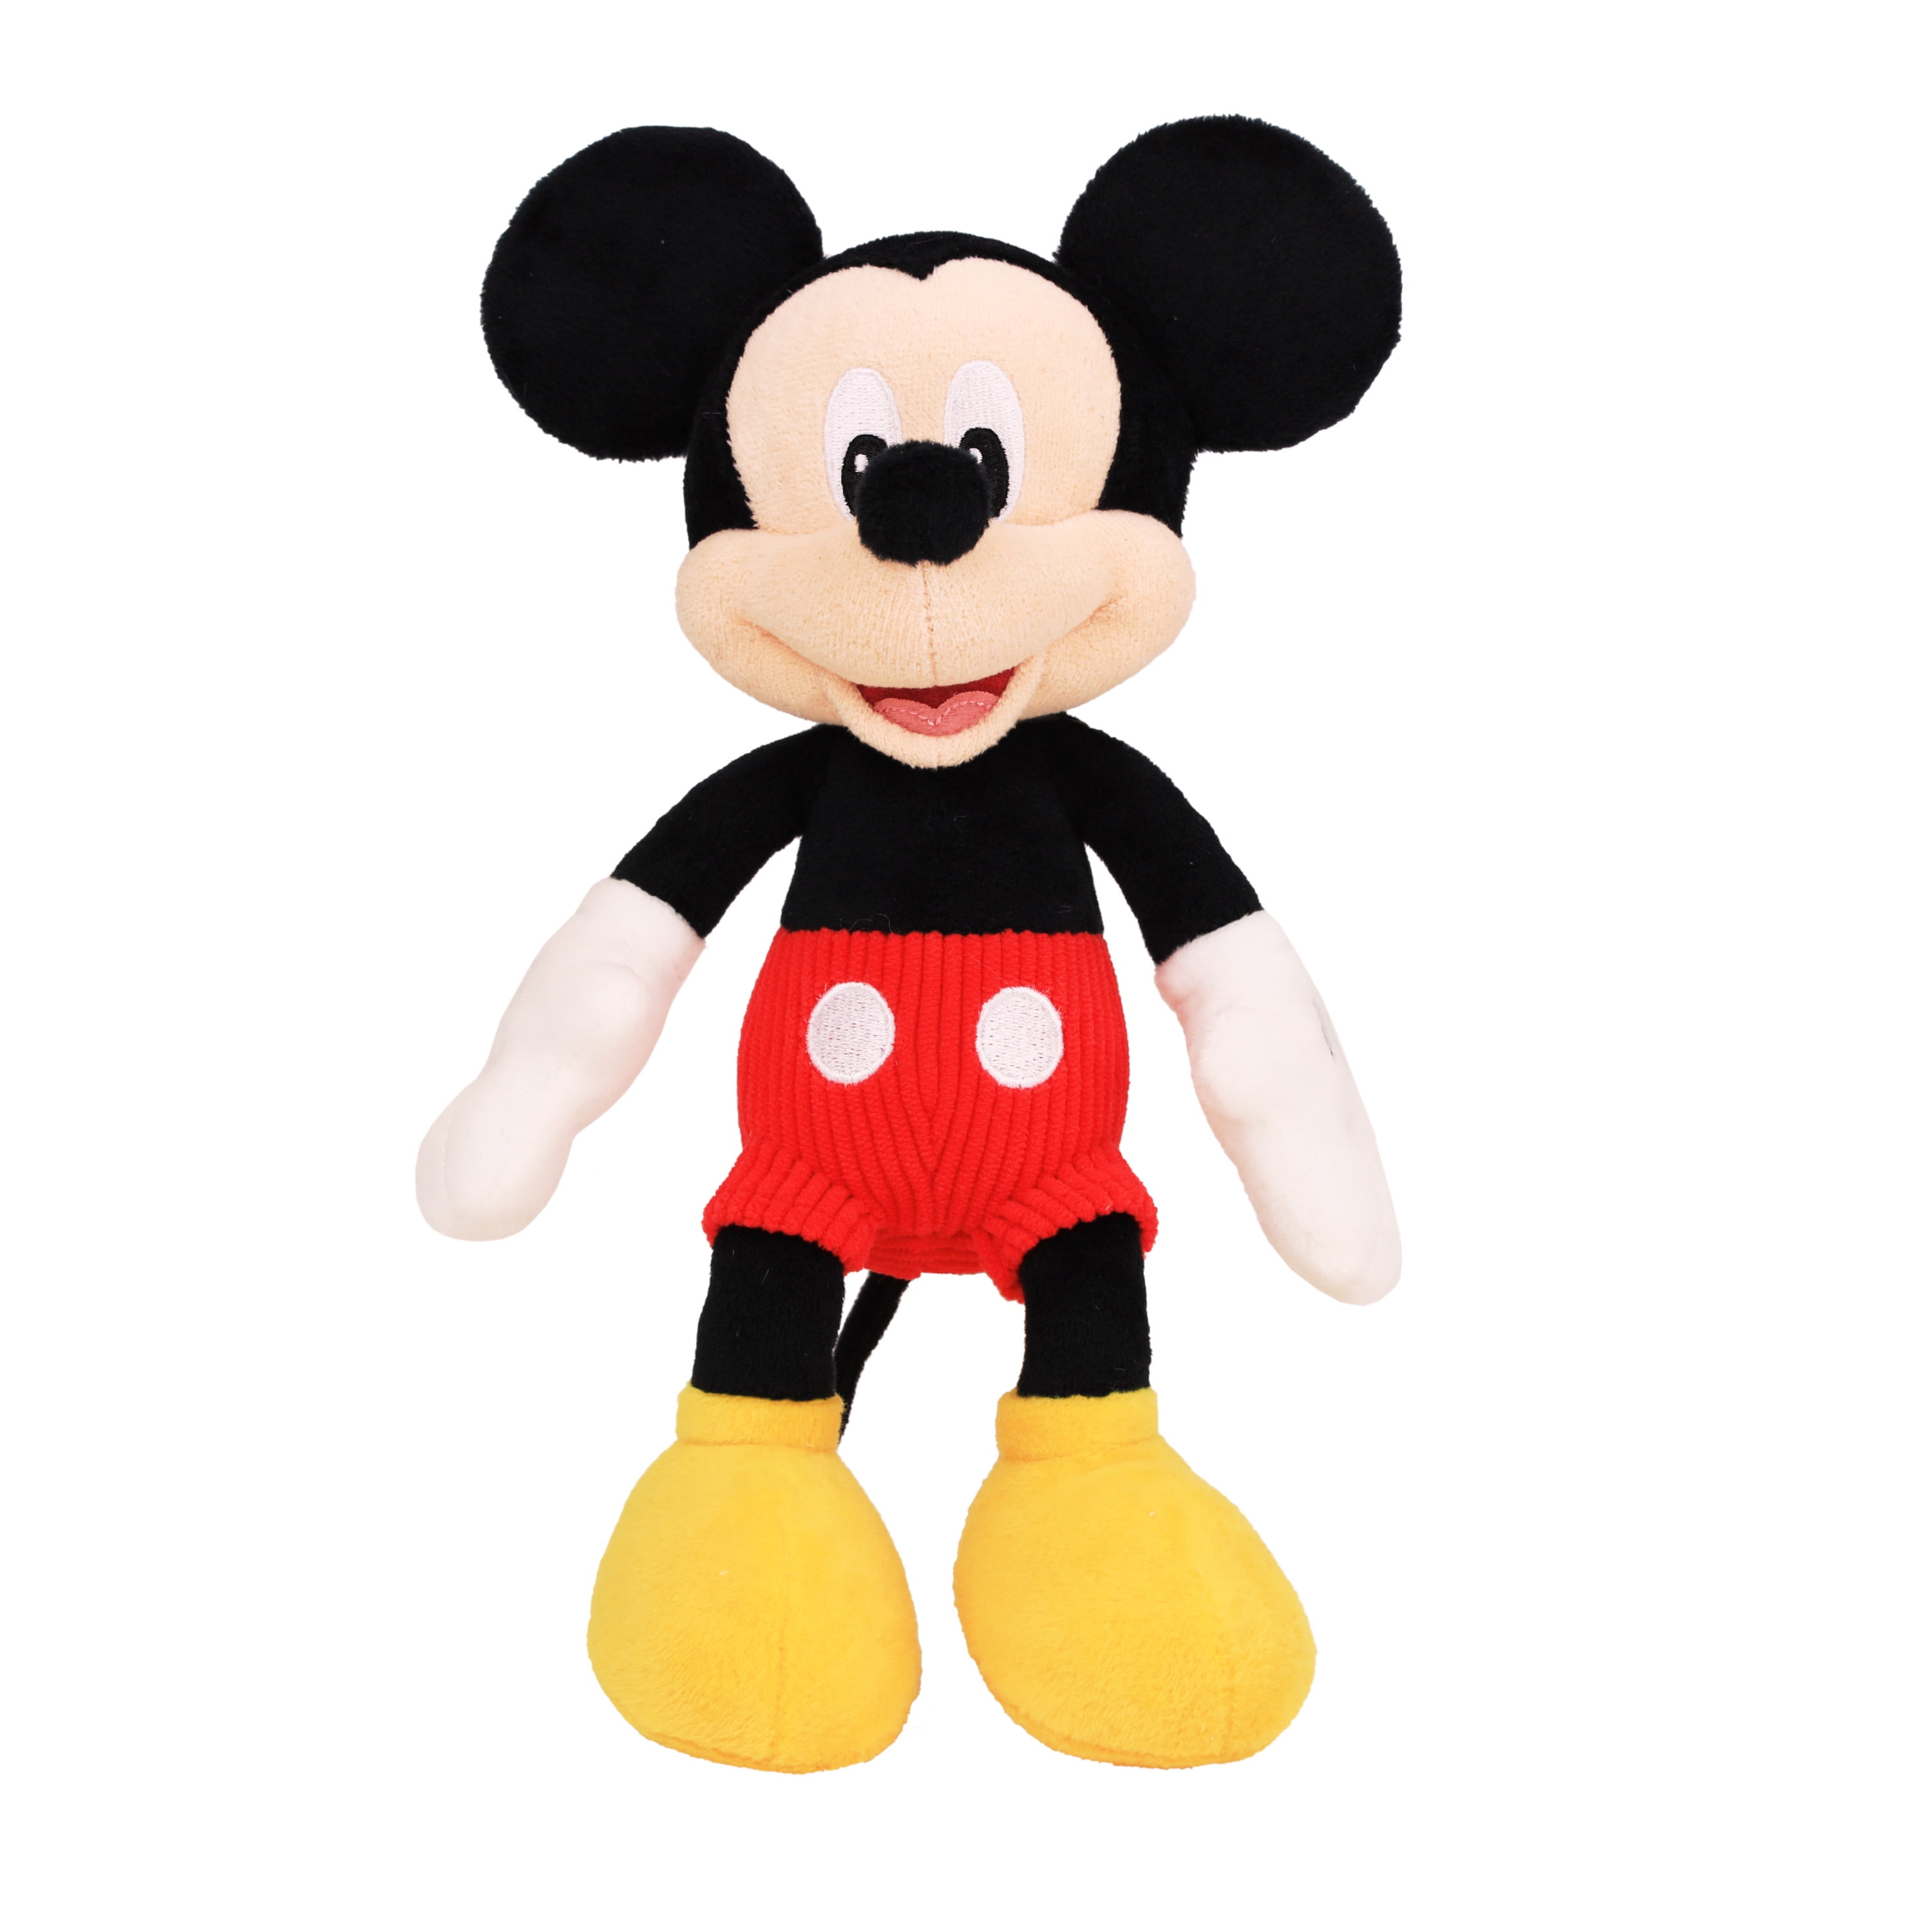 Details about   Disney MICKEY MOUSE 8" Beanbag  plush "The Spirit of Mickey" w/Tag 